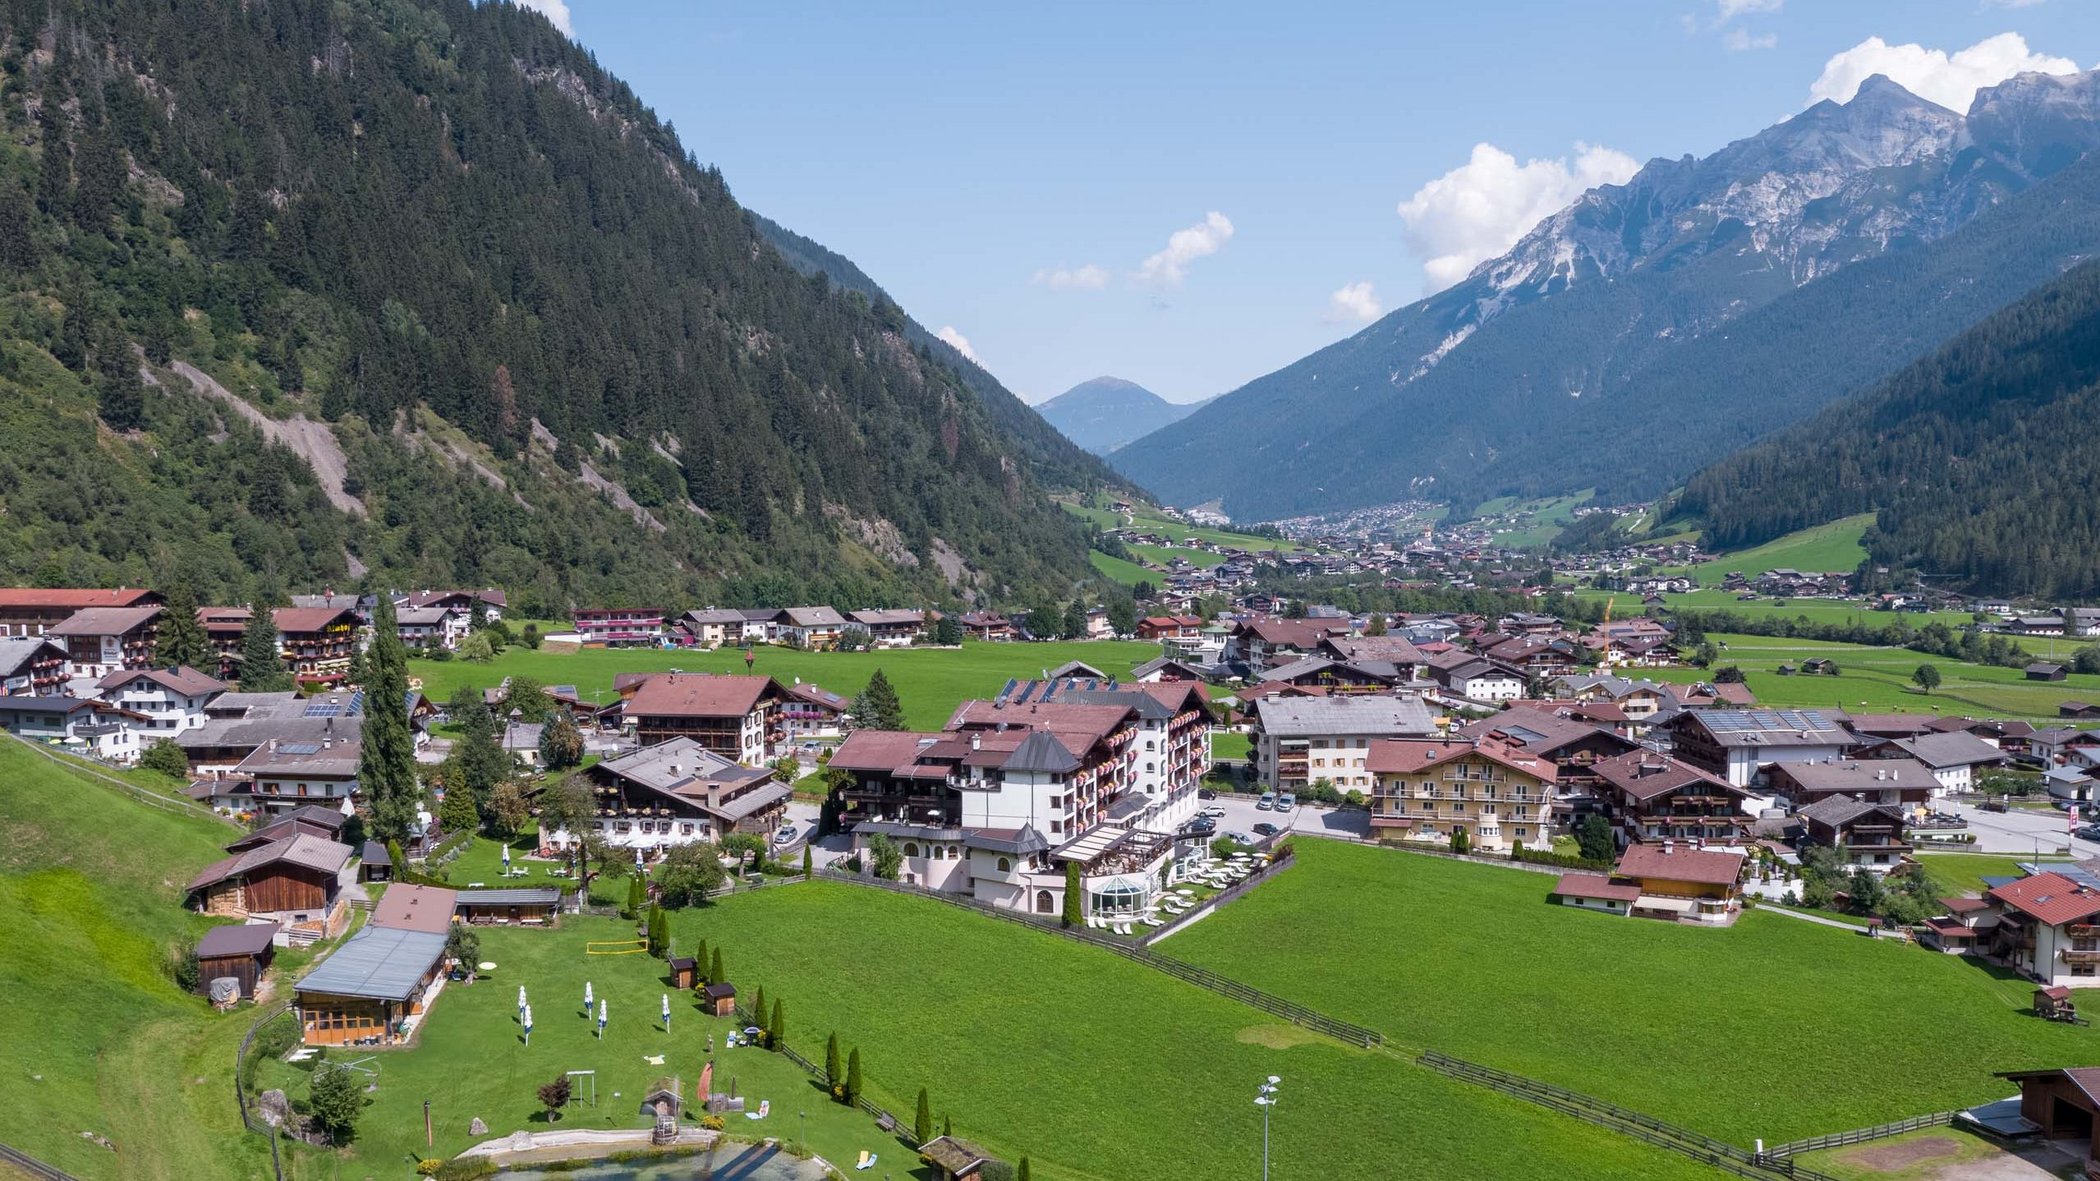 Your journey to our hotel in Neustift